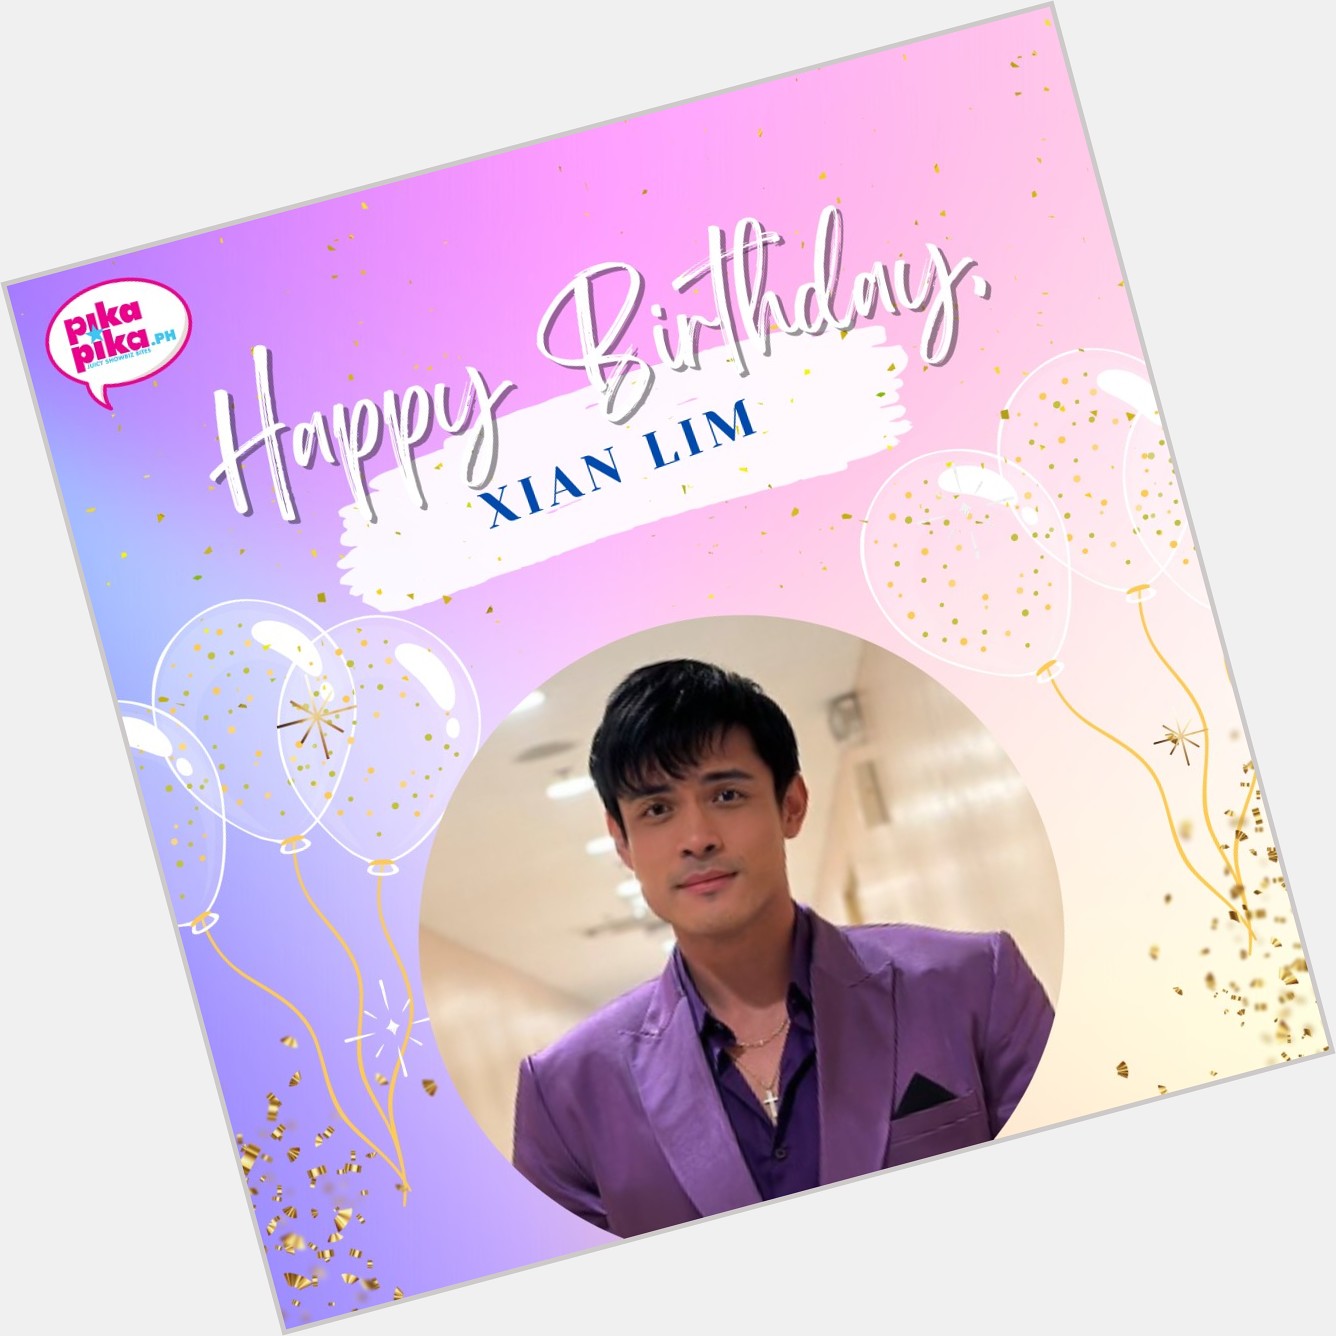 Happy birthday, Xian Lim! May your special day be filled with love and cheers.    